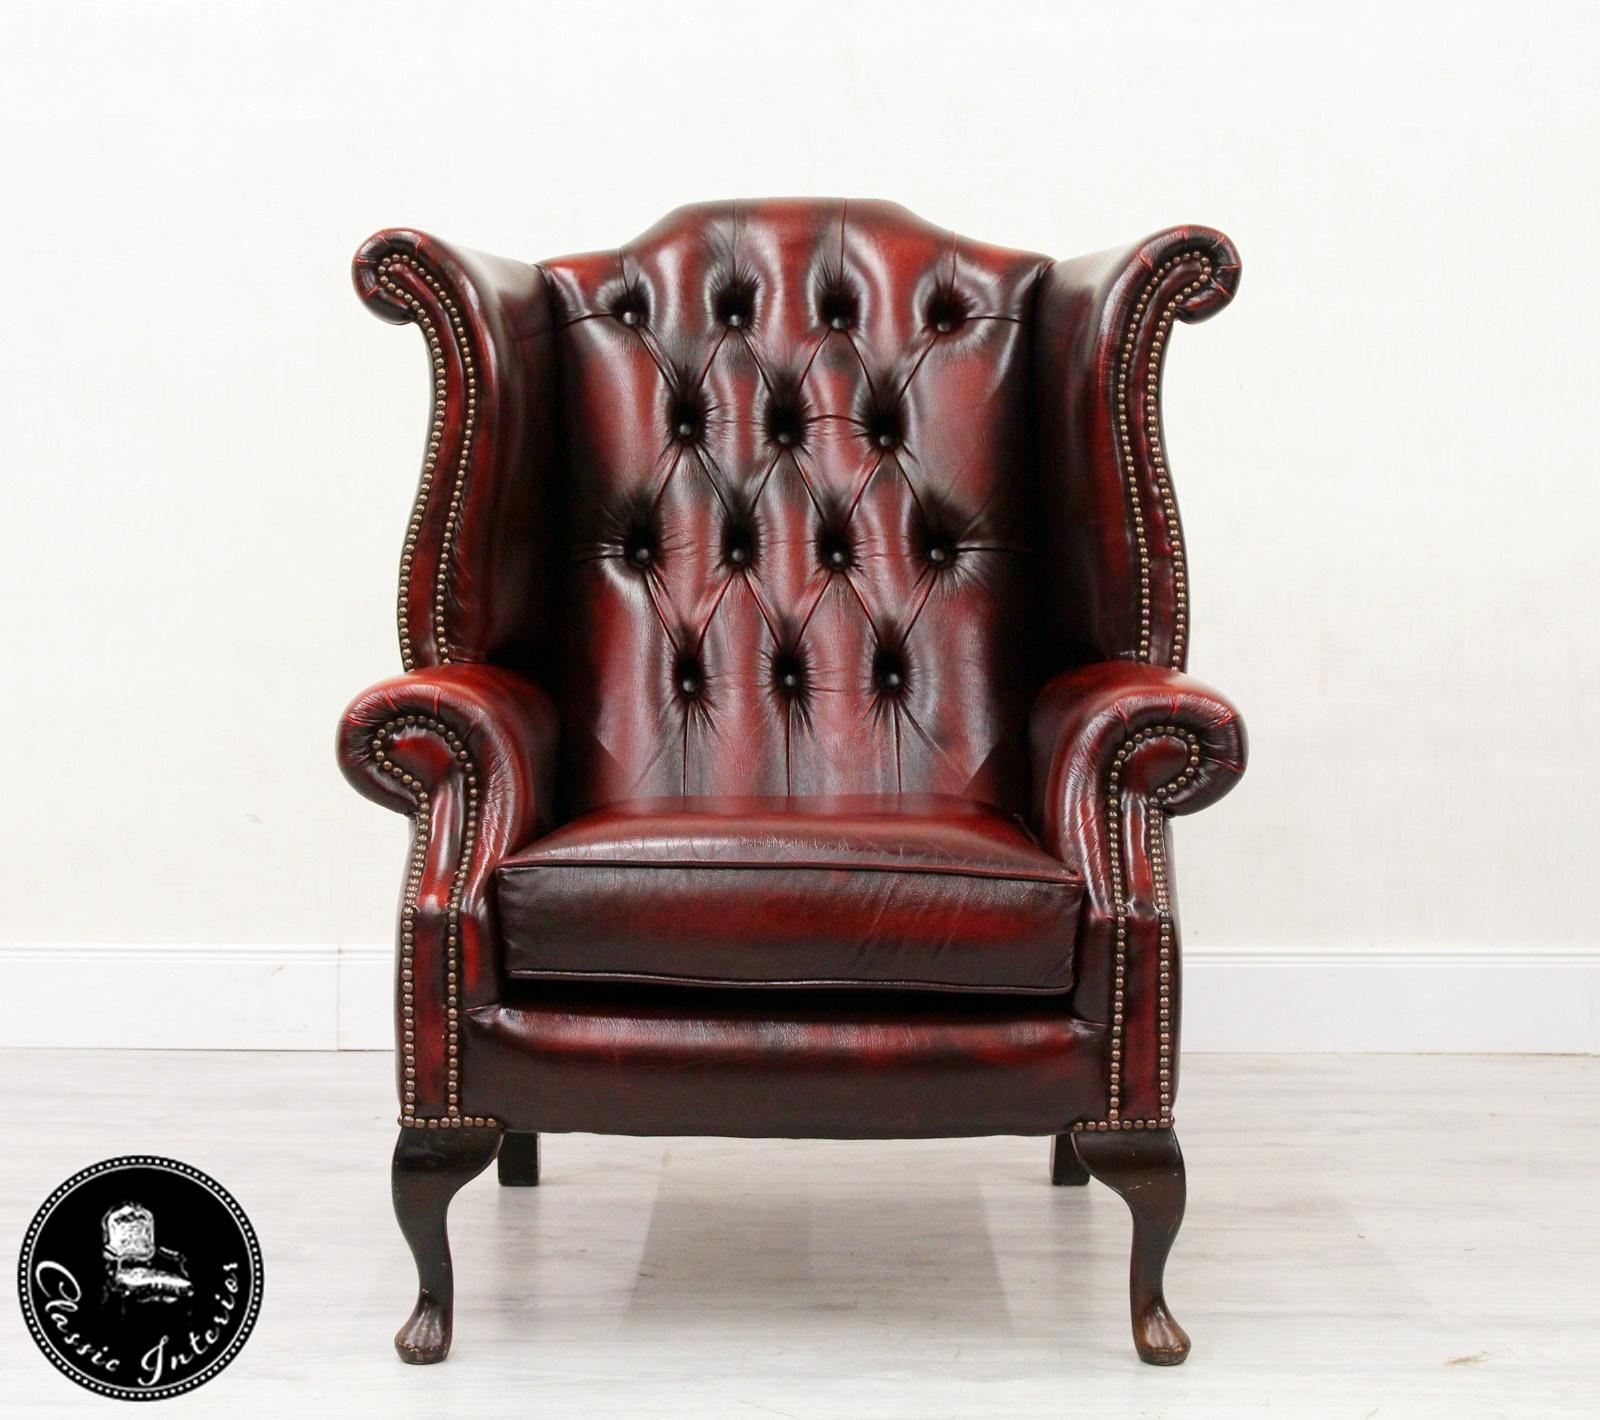 Chesterfield armchair
in original design 1980-1990

Condition: The armchairs are in a very good condition, with normal traces of usage.
armchair
Height x 105 cm width x 90 cm depth x 80 cm
recliner
H x 105 cm W x 90 cm D x 80 cm pulled out